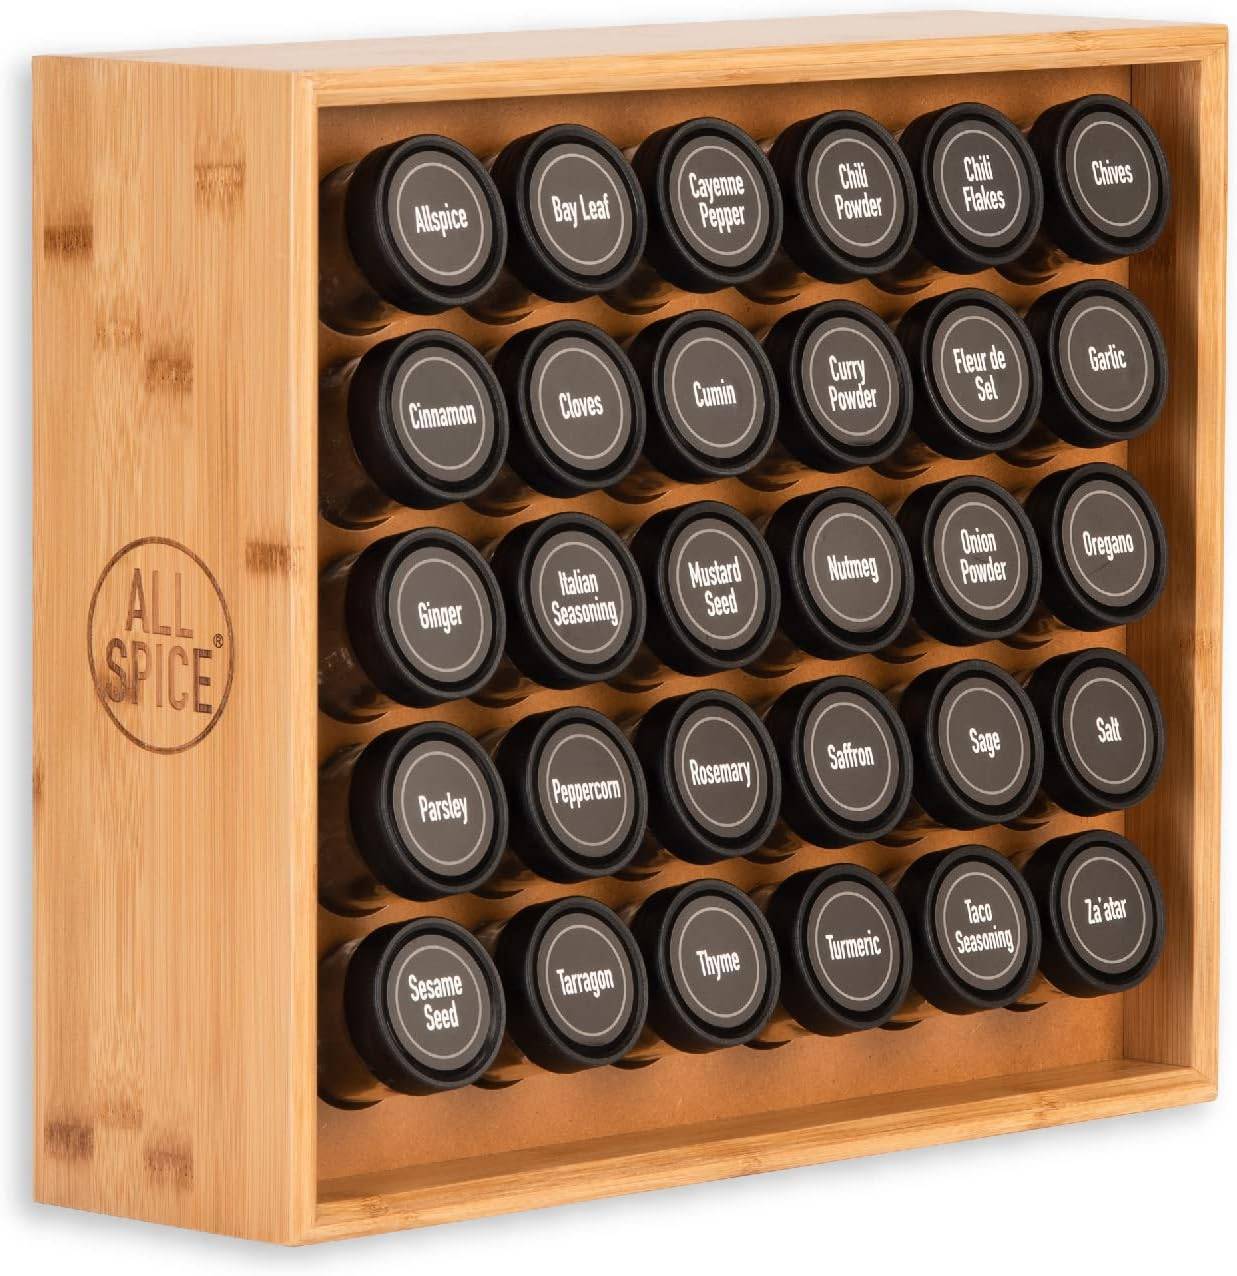 A wooden spice rack.